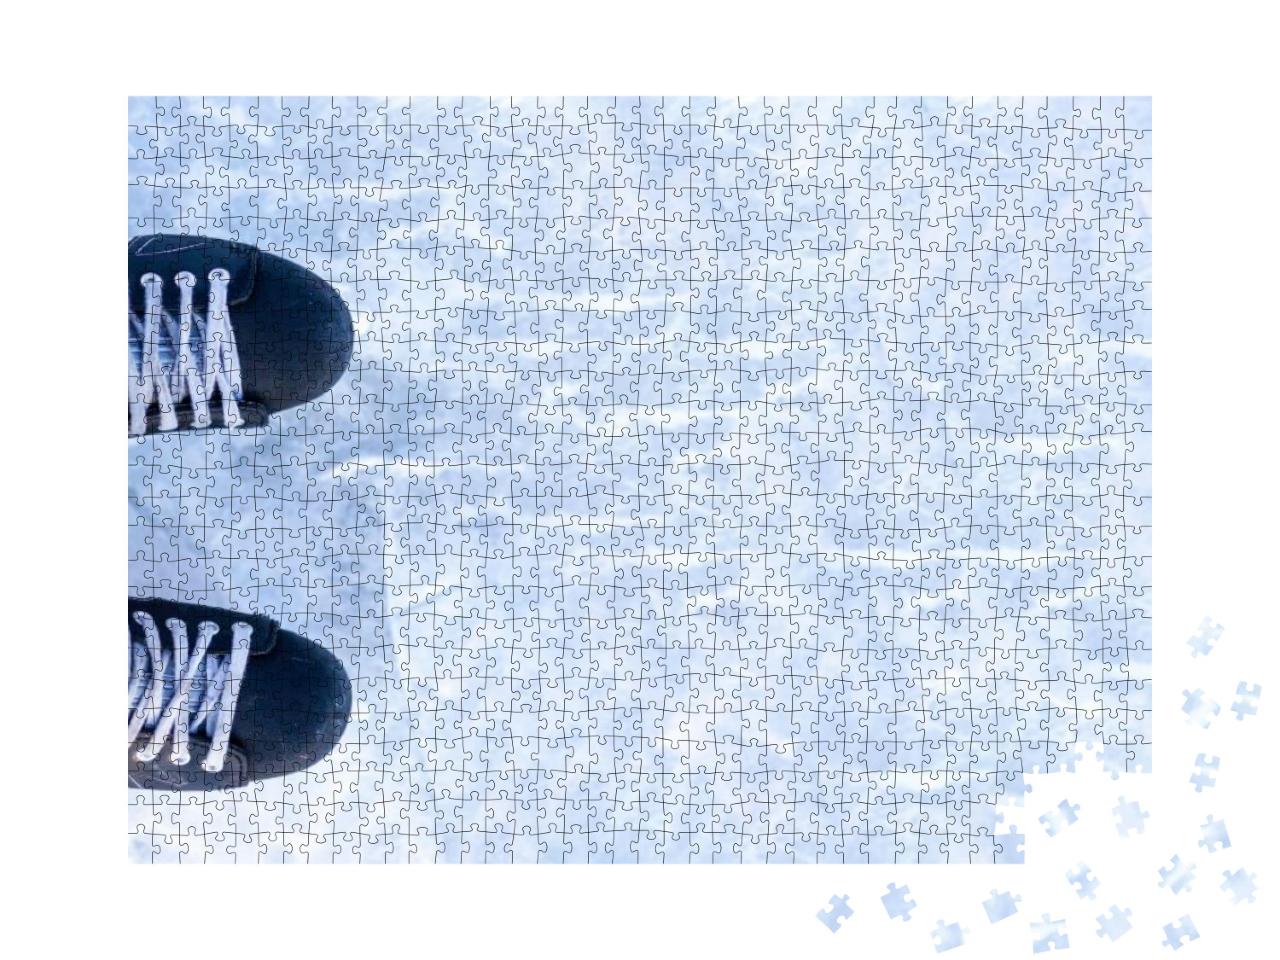 A Pair of Hockey Skates with Laces on Frozen Ice Rink Clo... Jigsaw Puzzle with 1000 pieces